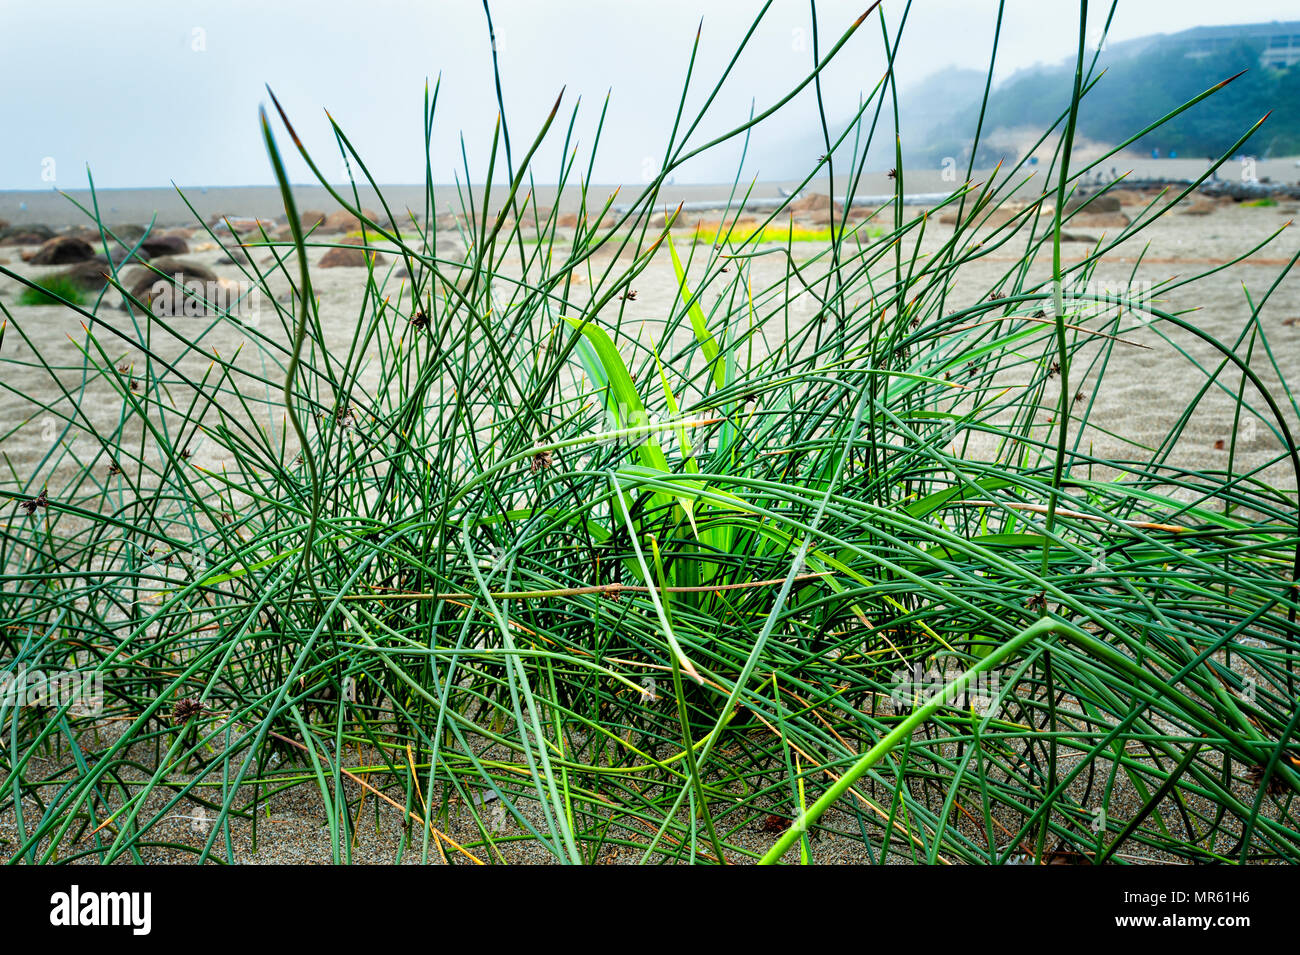 Green sedge stands out amongst the rocks and sand at Fogarty Creek Beach in Lincoln City Stock Photo